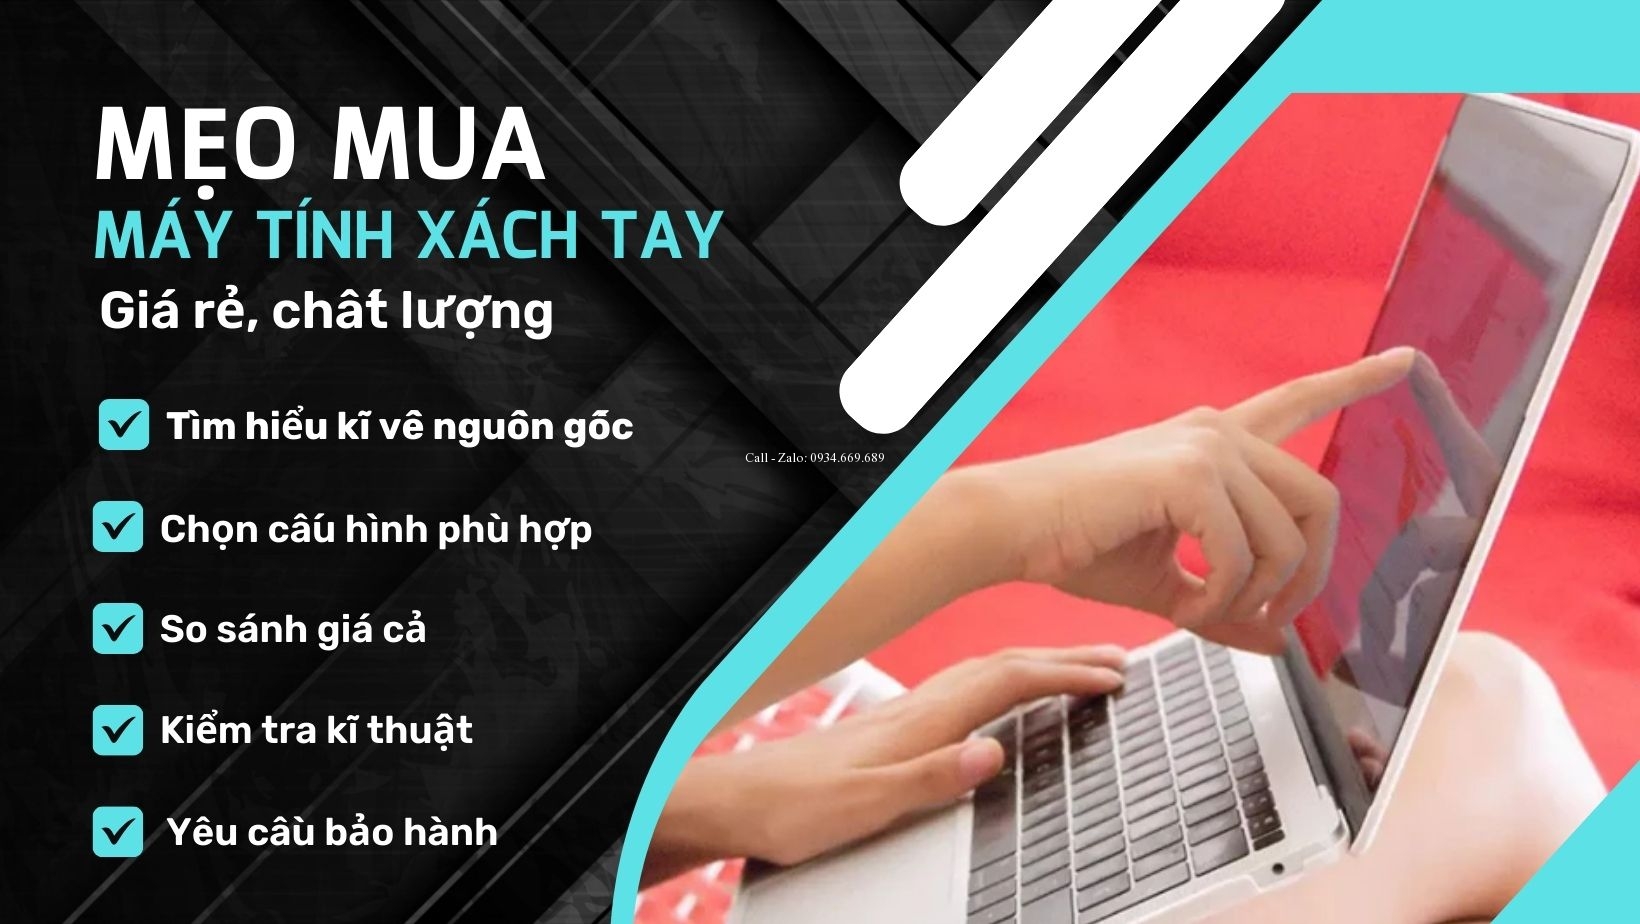 meo-mua-may-tinh-xach-tay-gia-re-chat-luong